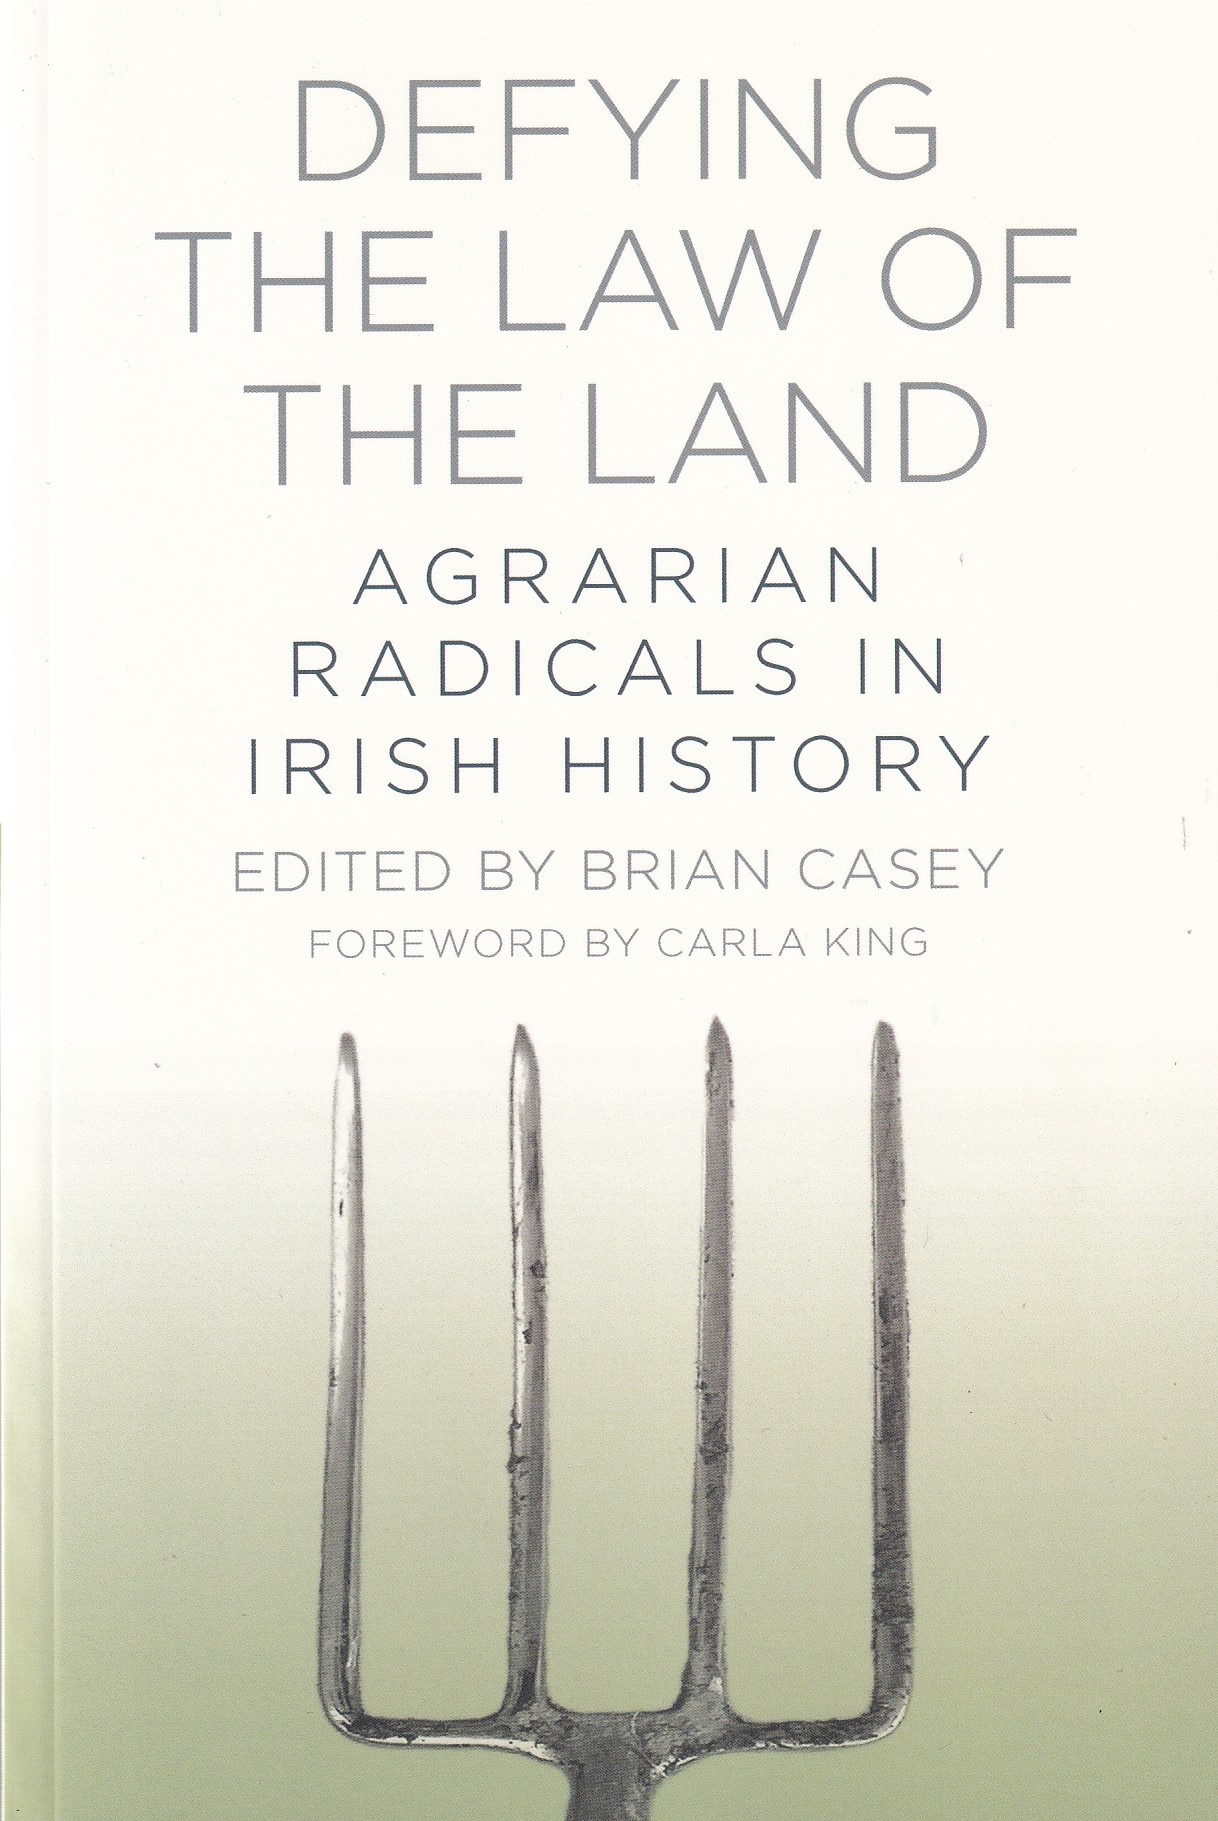 Defying the Law of the Land: Agrarian Radicals in Irish History by Brian Casey